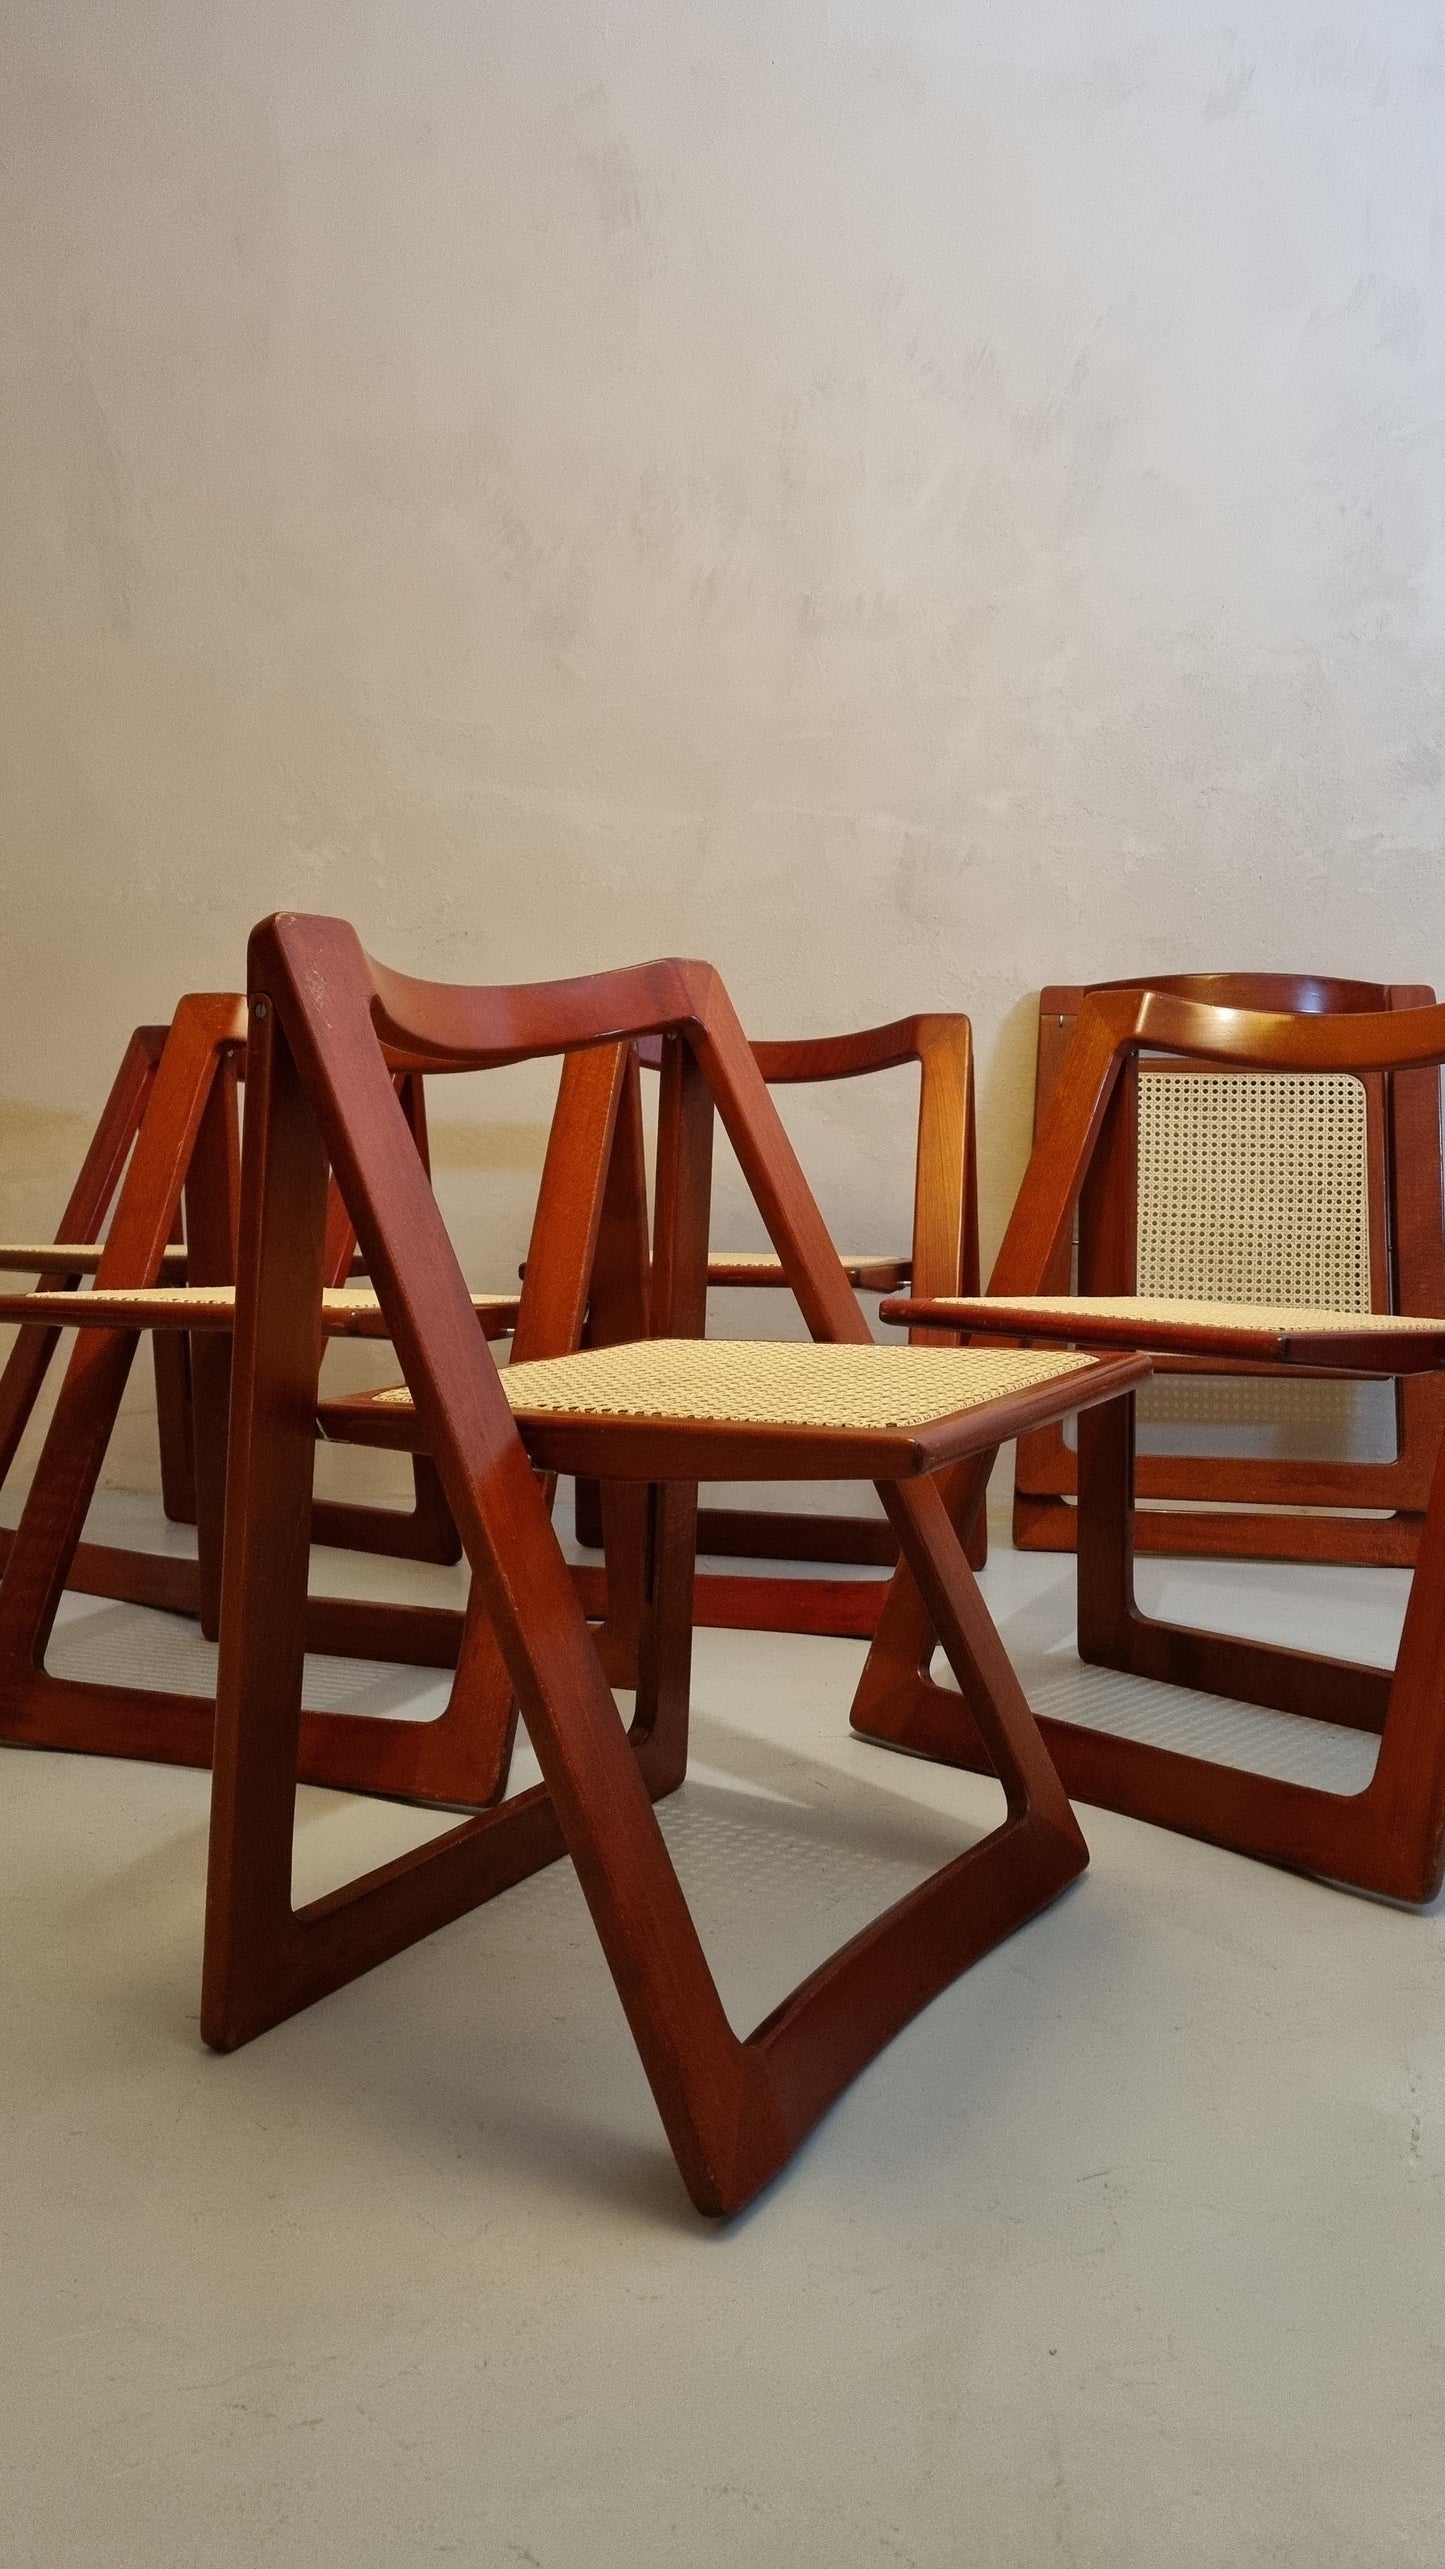 Trieste Folding Chairs by Aldo Jacober (Set of 6) Chairs Vintage